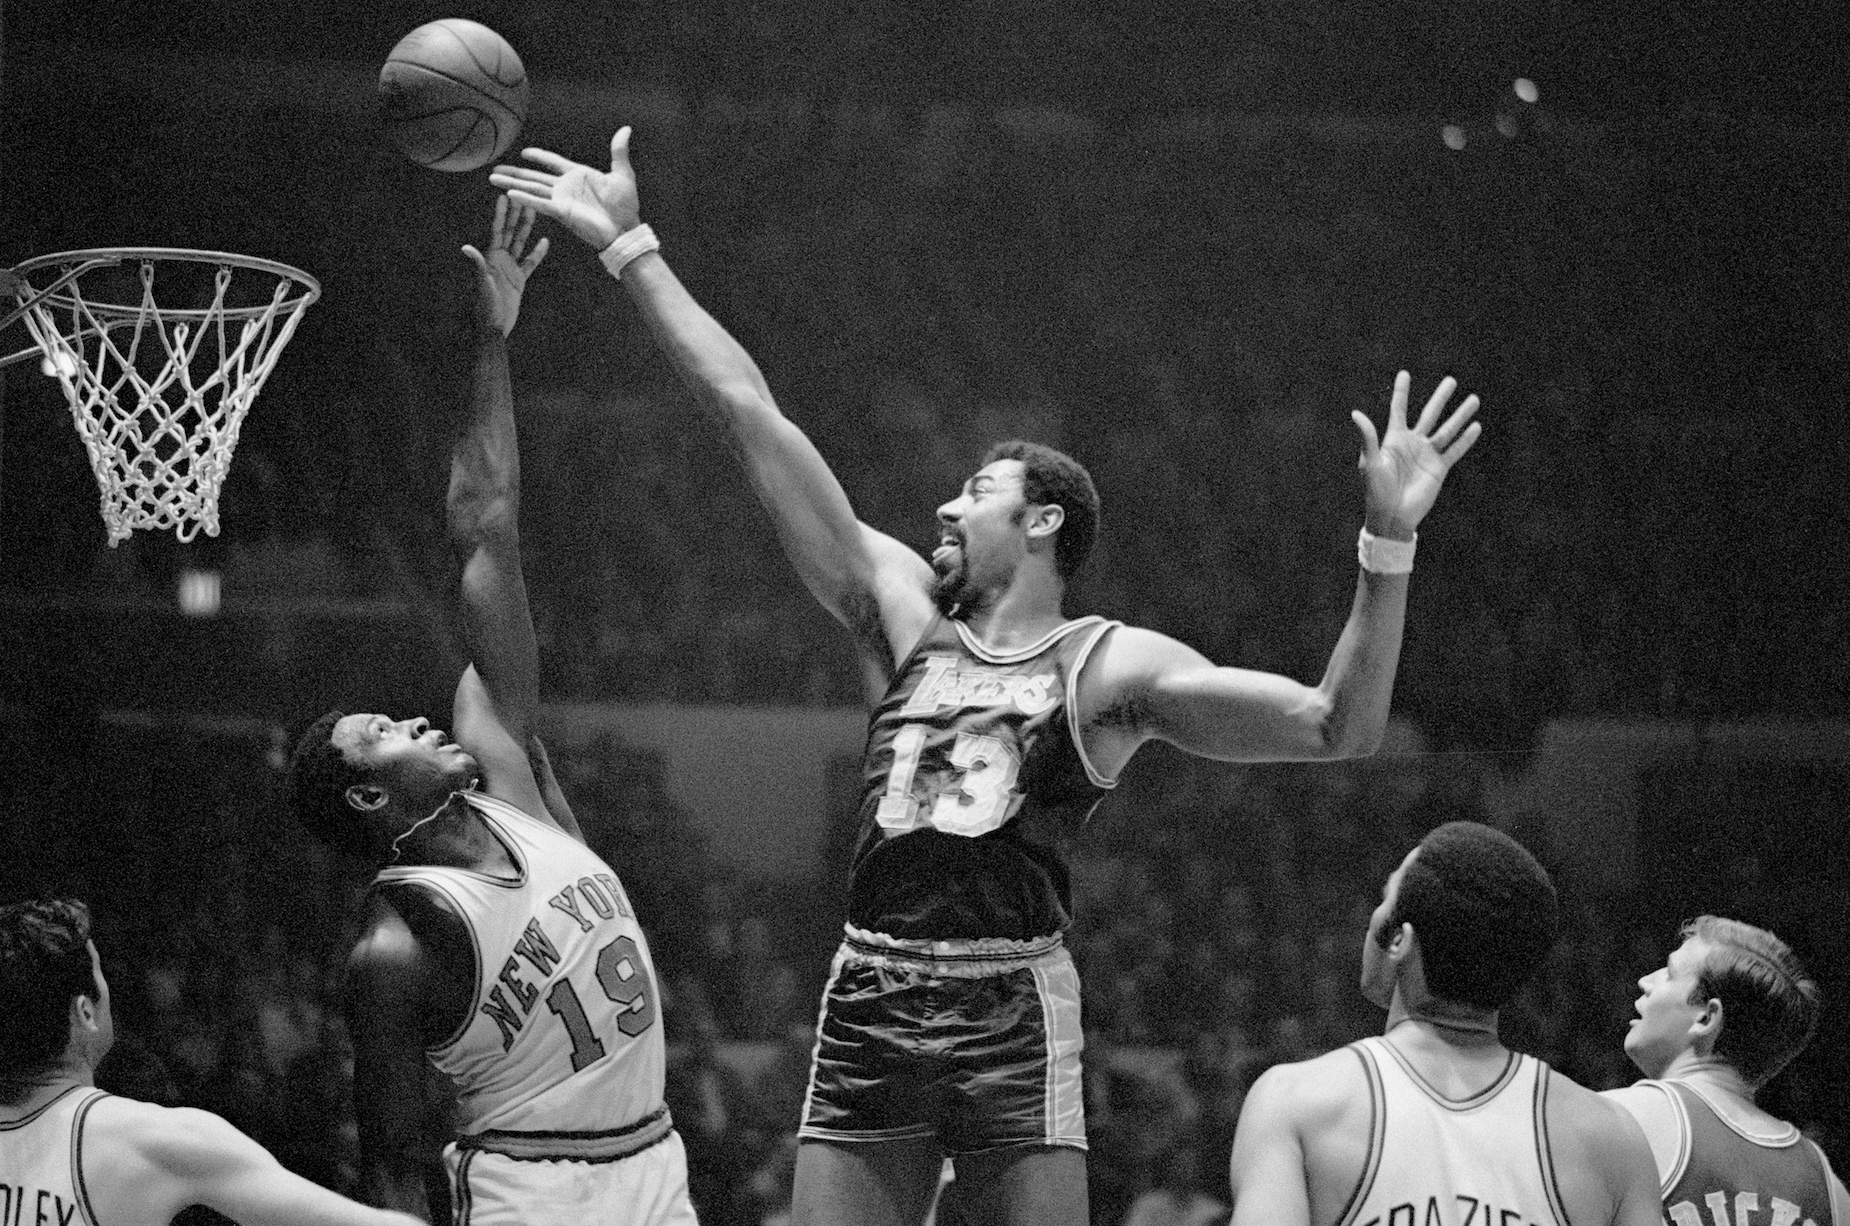 Even without his 100-point game, Wilt Chamberlain still dominates the NBA's all-time scoring list.